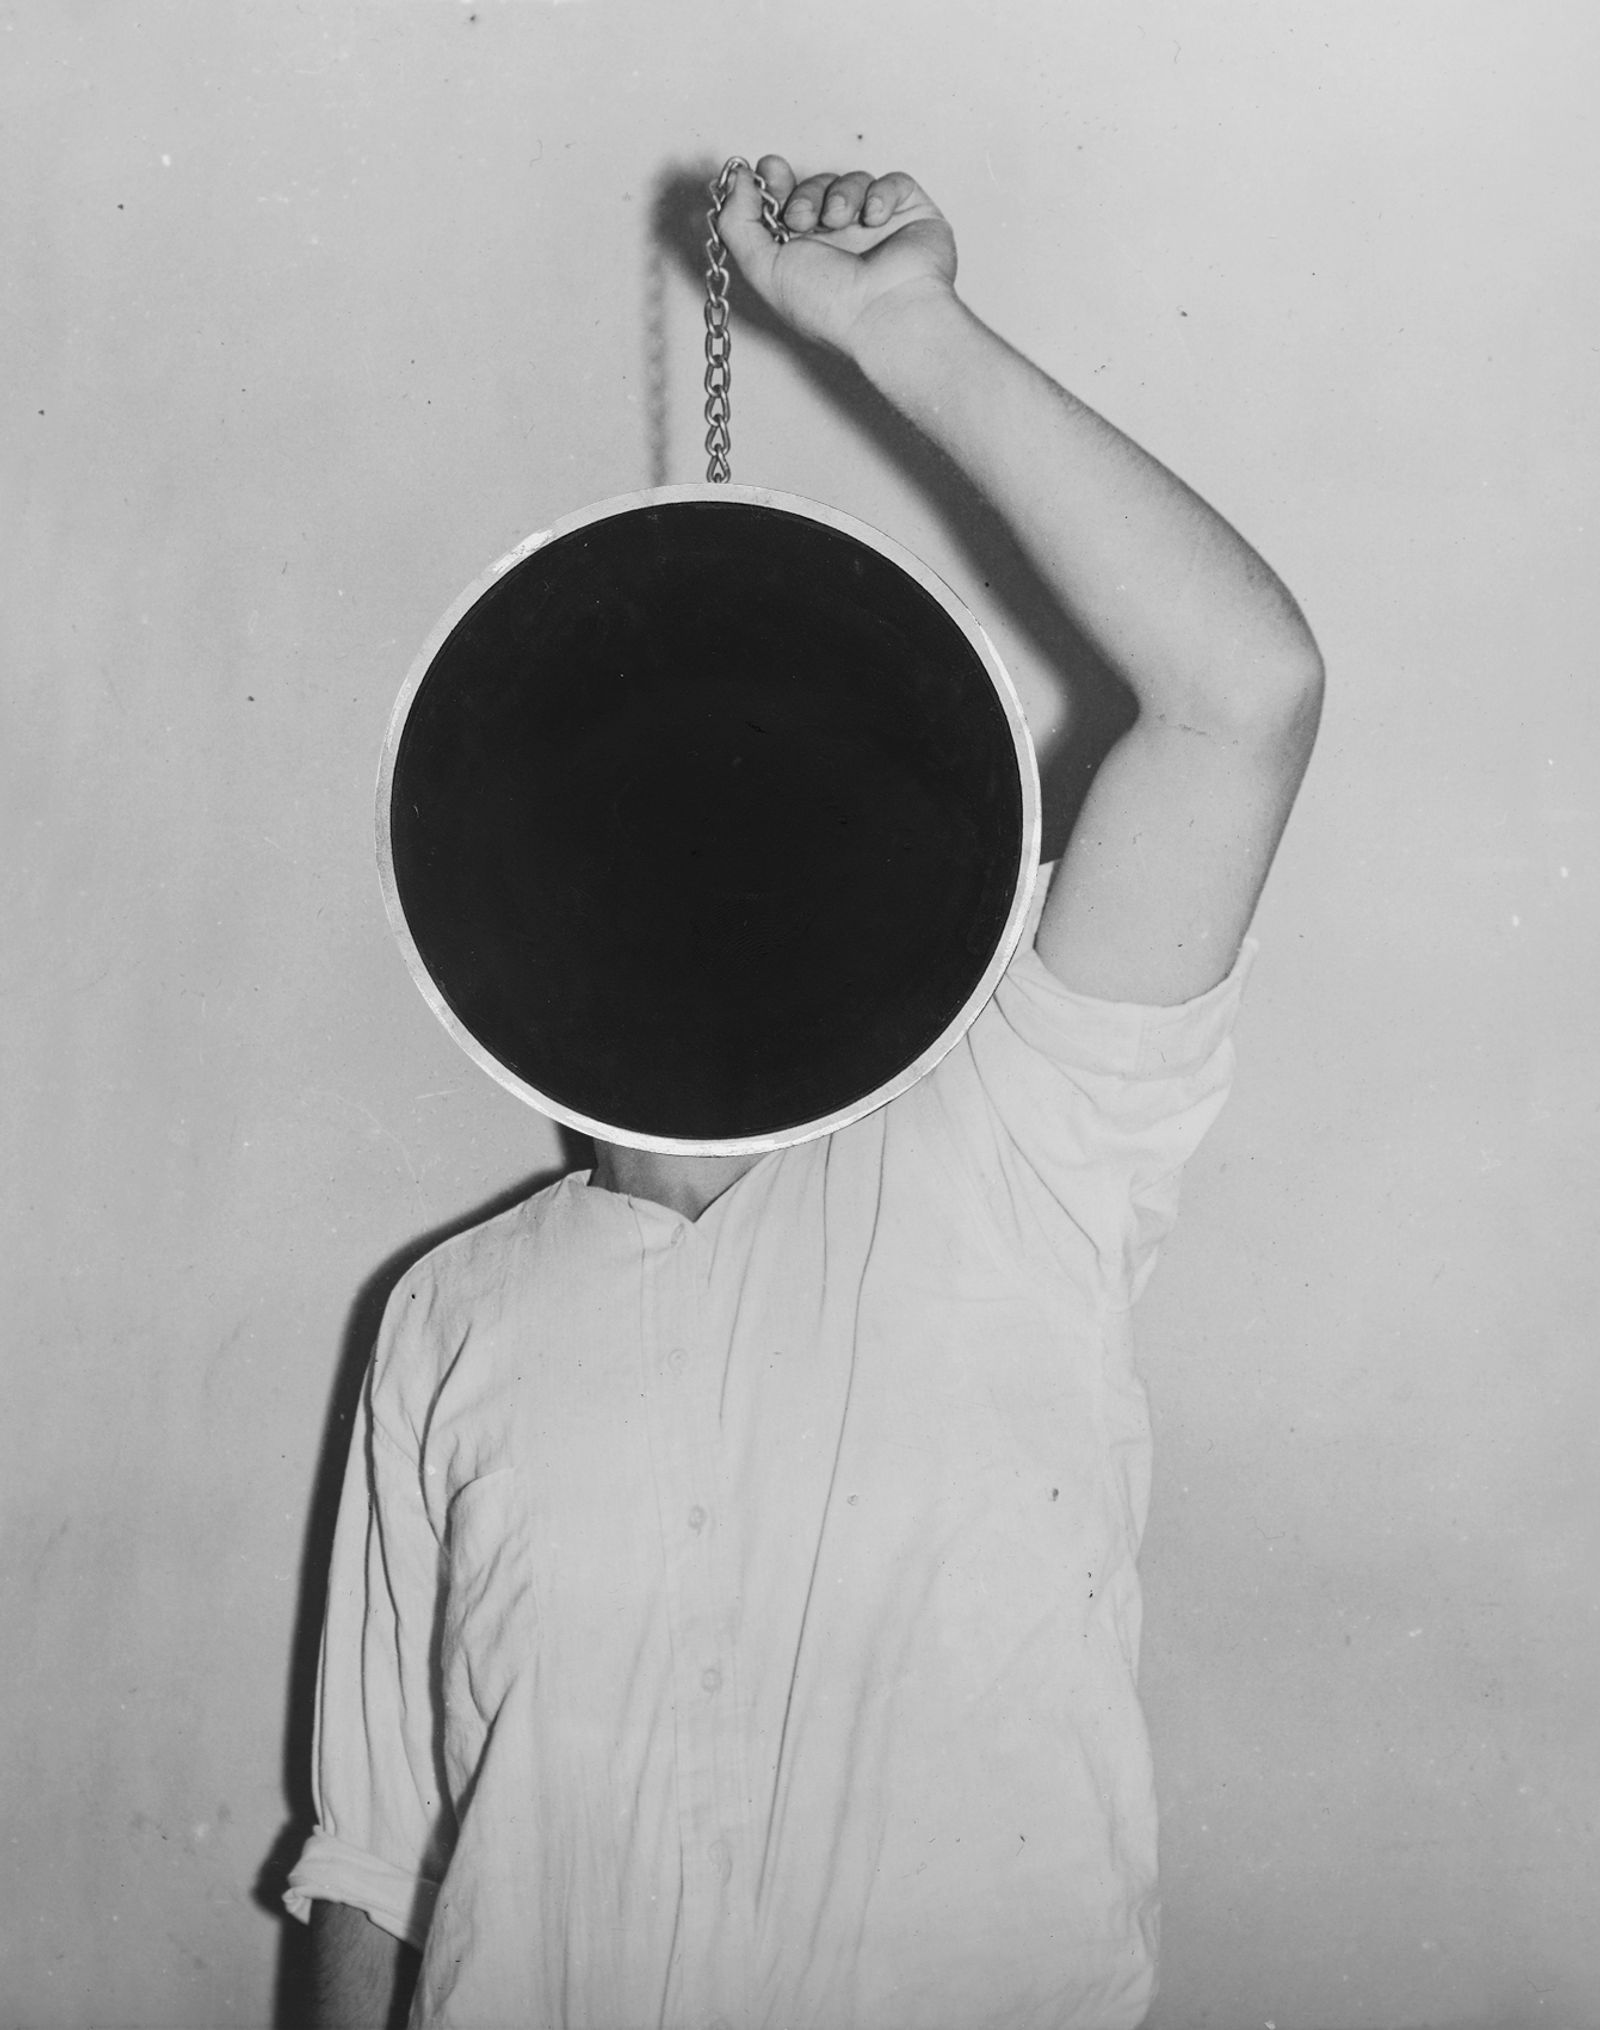 © Edgar Martins - Image from the What Photography & Incarceration have in Common with an Empty Vase photography project